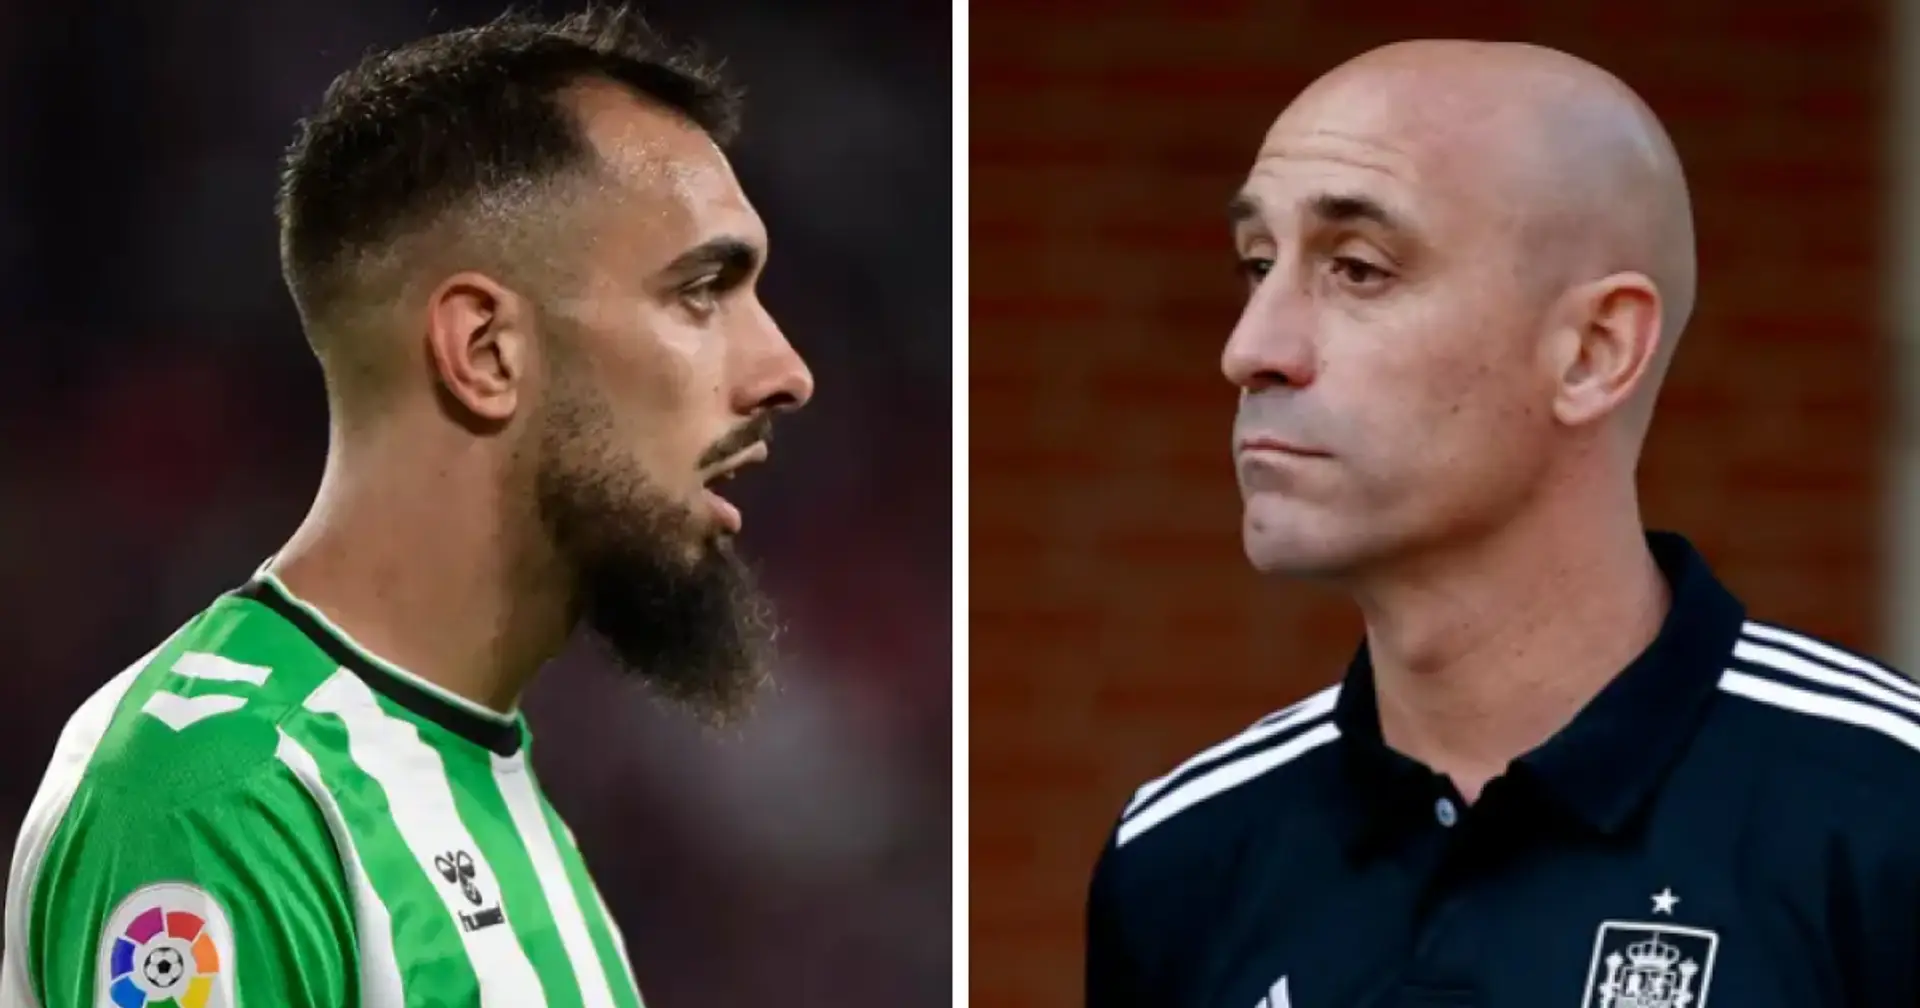 'This type of act does not go unpunished': Borja Iglesias claims he won't return to Spanish national team with current Luis Rubiales situation